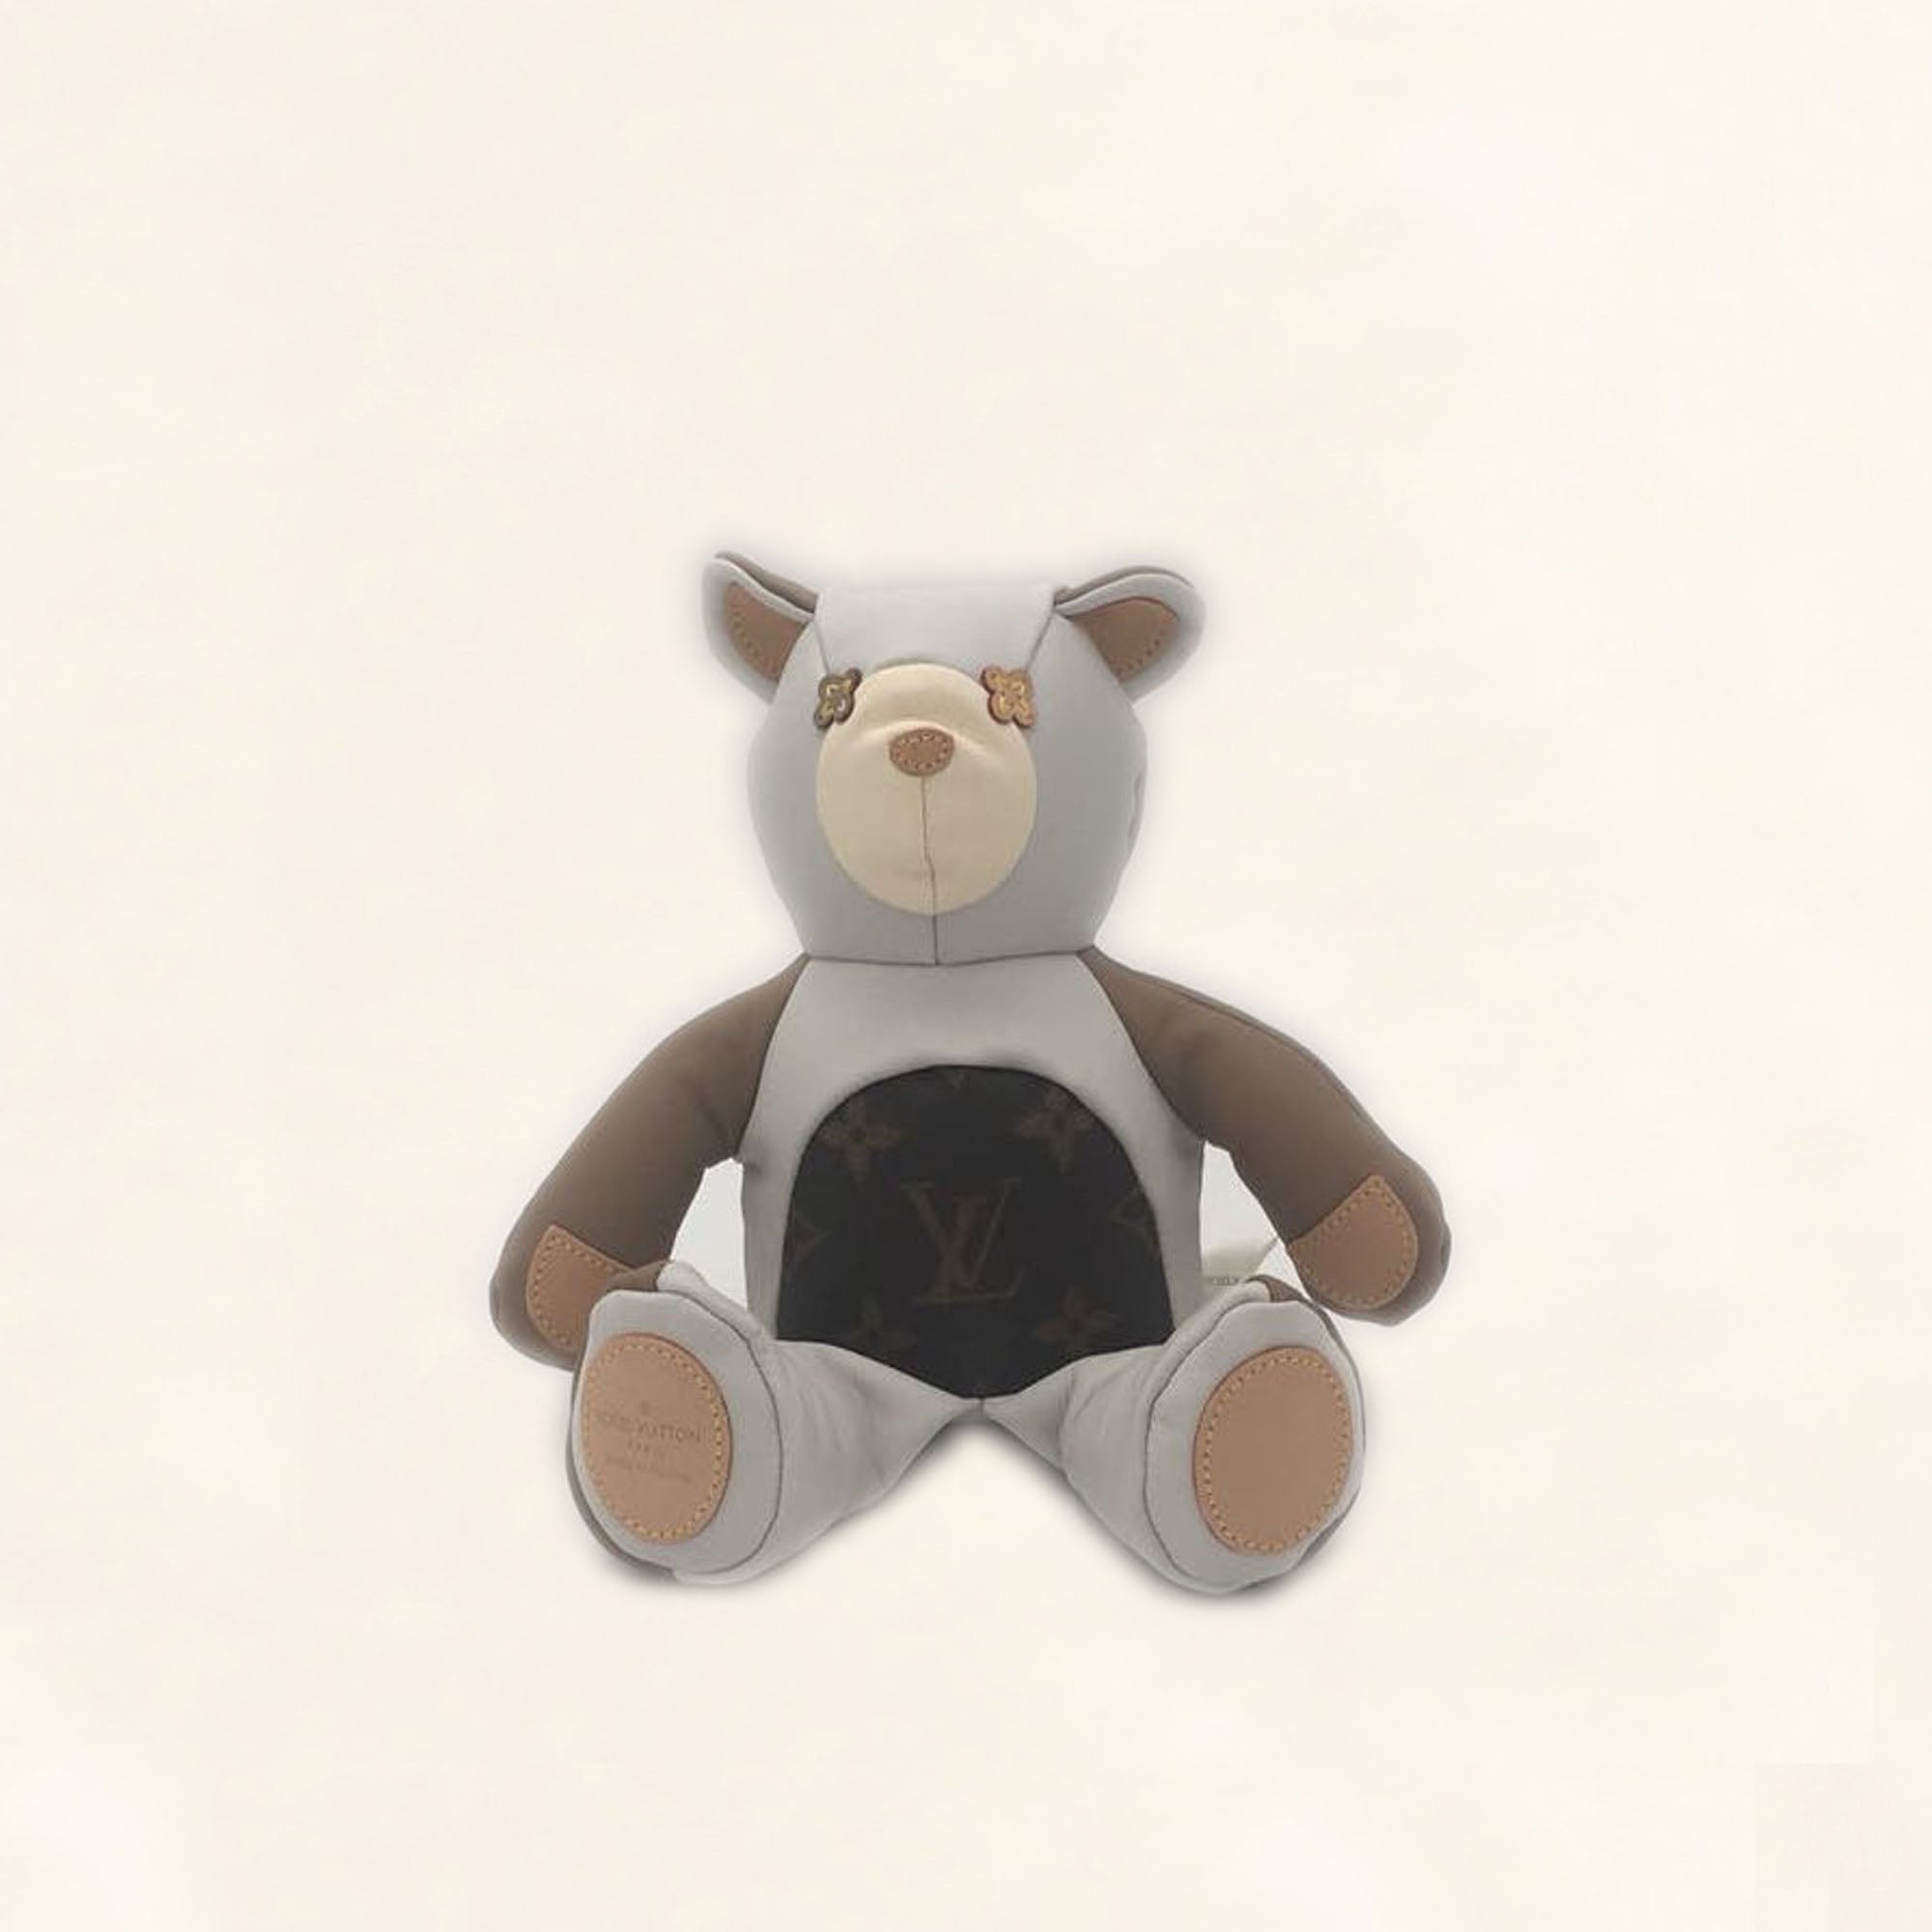 A $9,000 Monogrammed Louis Vuitton Teddy Bear Exists – StyleCaster